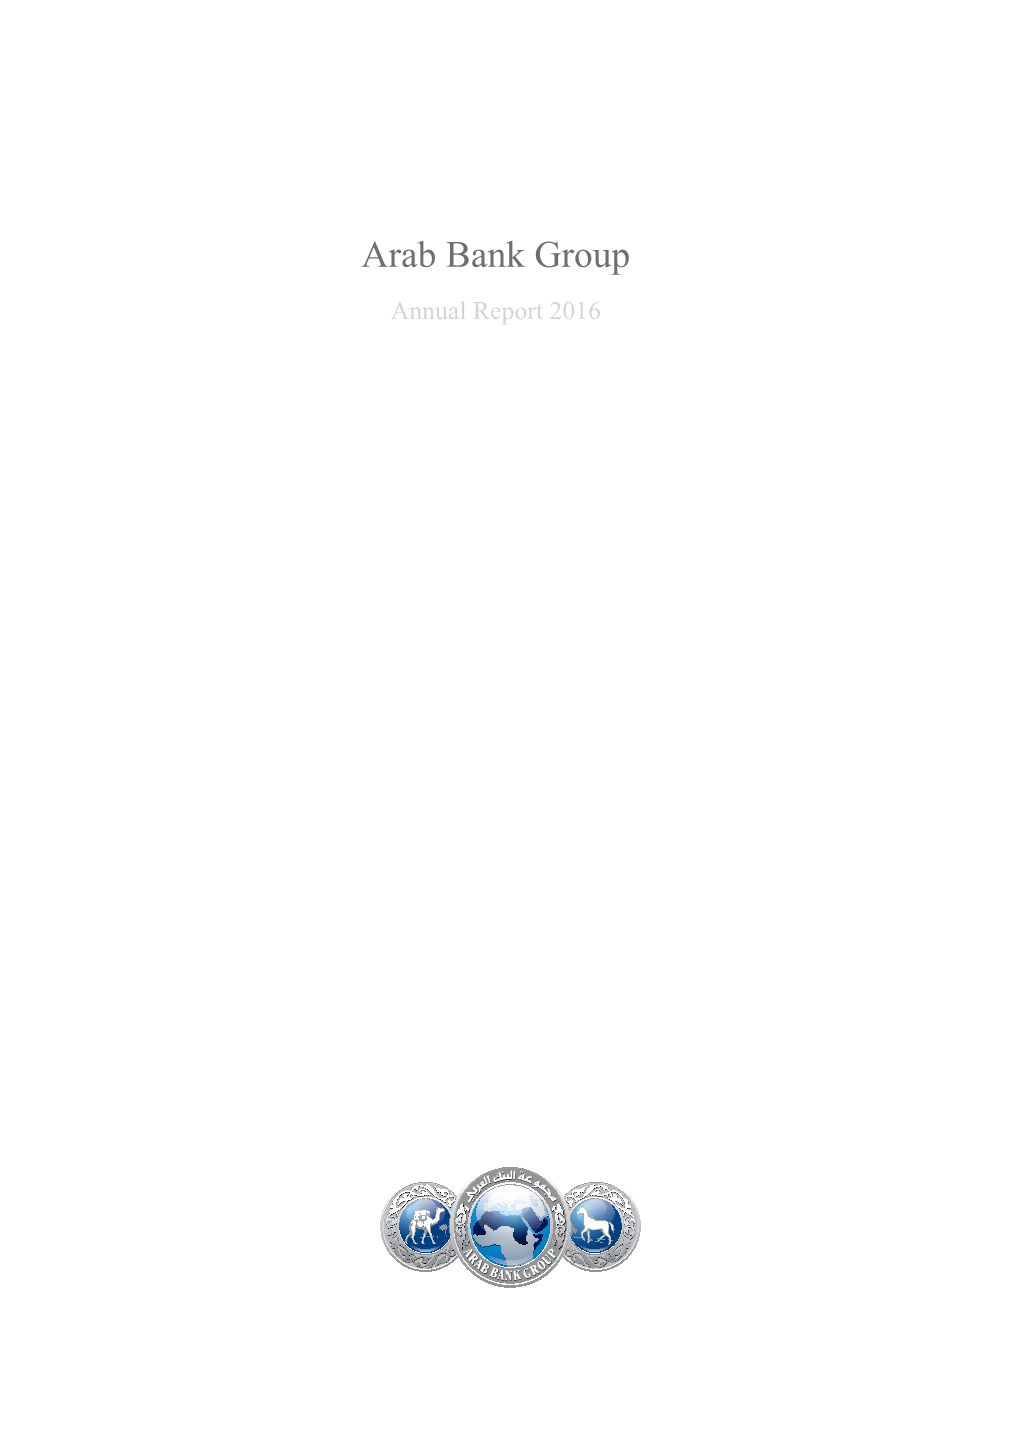 Arab Bank Group Annual Report 2016 TABLE of CONTENTS